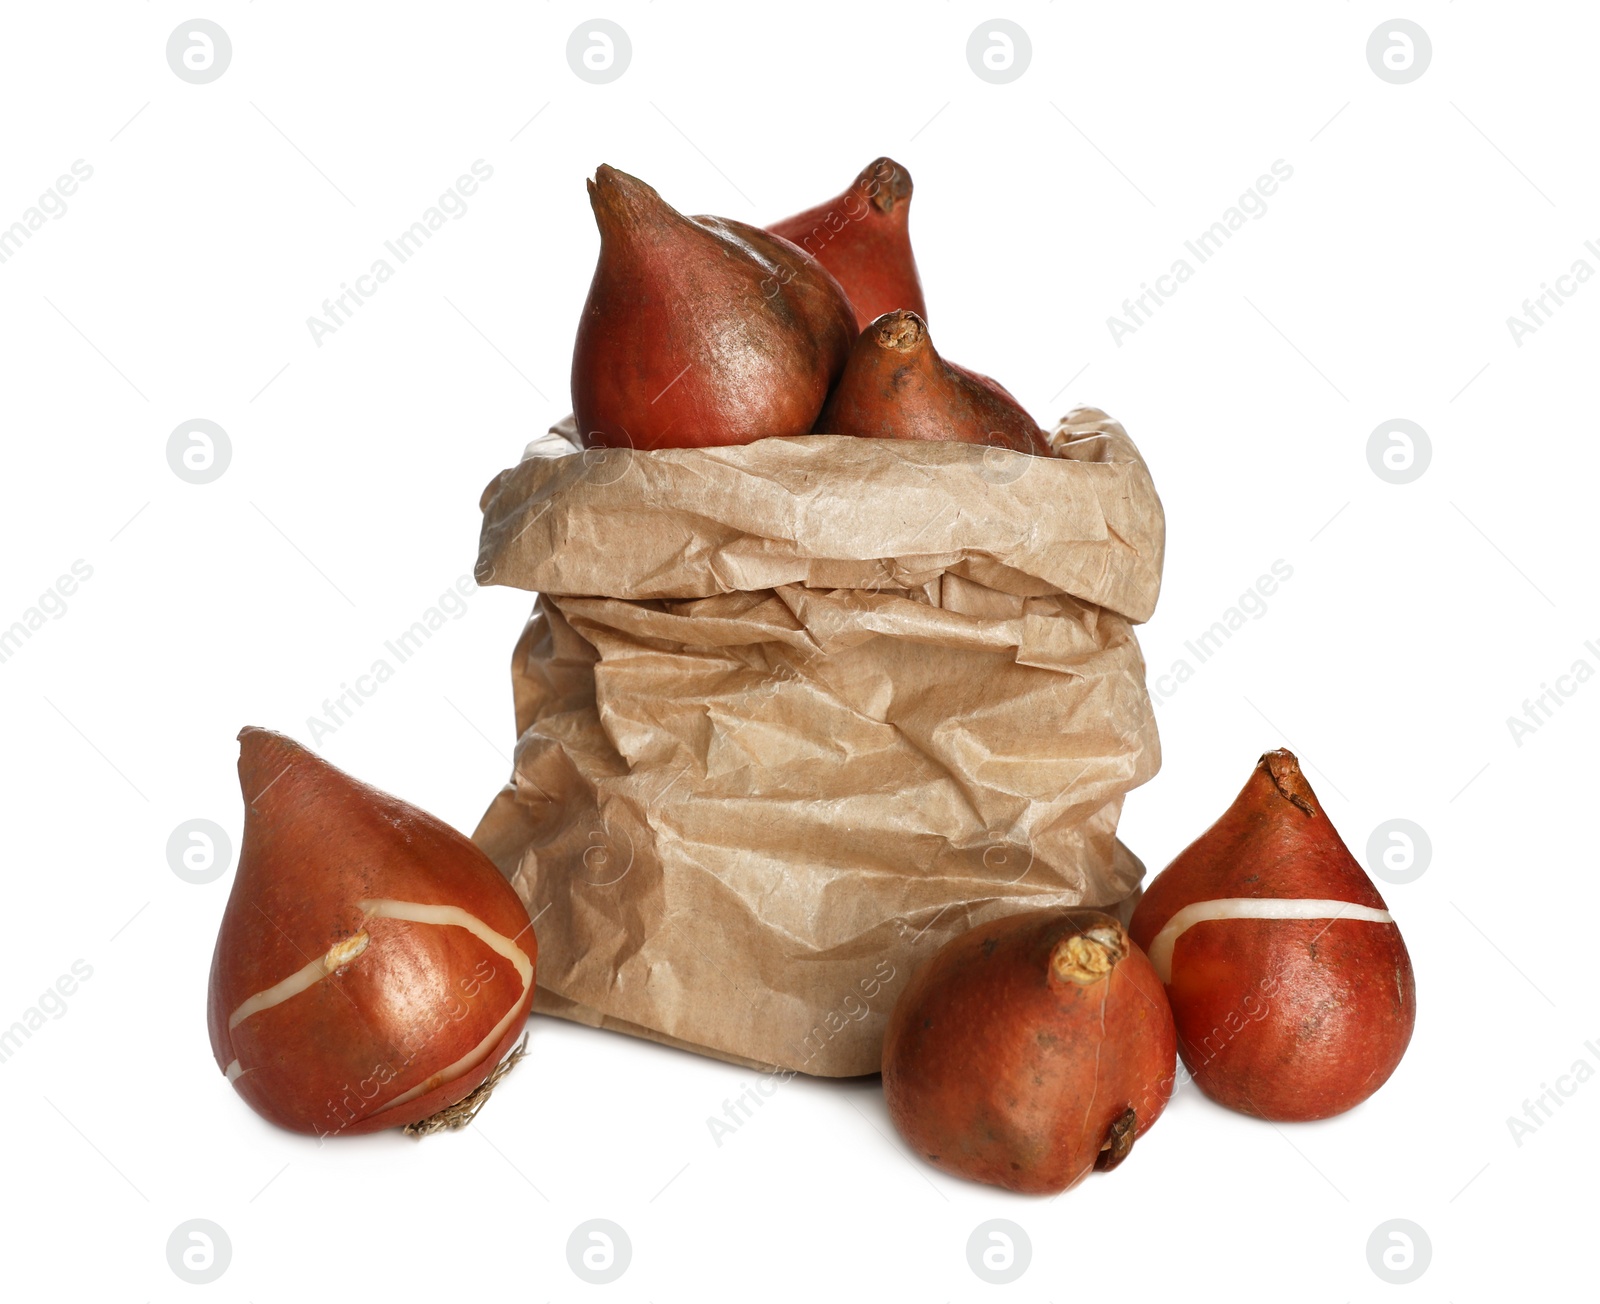 Photo of Tulip bulbs in paper bag on white background